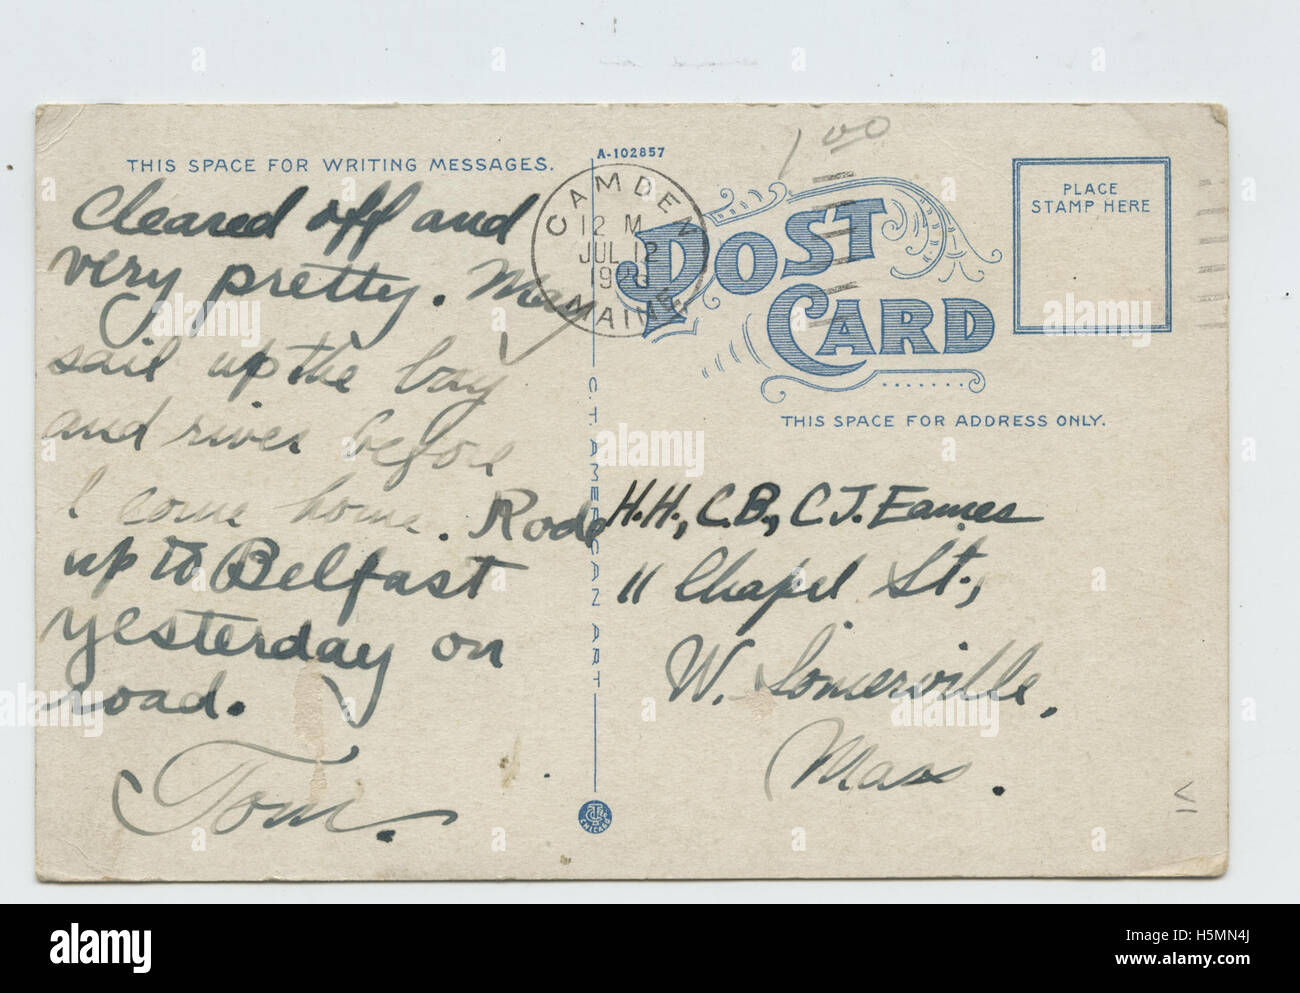 Postmarked Camden, July 12, 192[3?].  Cleared off and very pretty.  May sail up the bay and river before I come home.  Rode up to Belfast yesterday on the road. Tom  Addressed to: H.H., C.B., C.J. Eames 11 Chapel ST W. Somerville, Mass Stock Photo